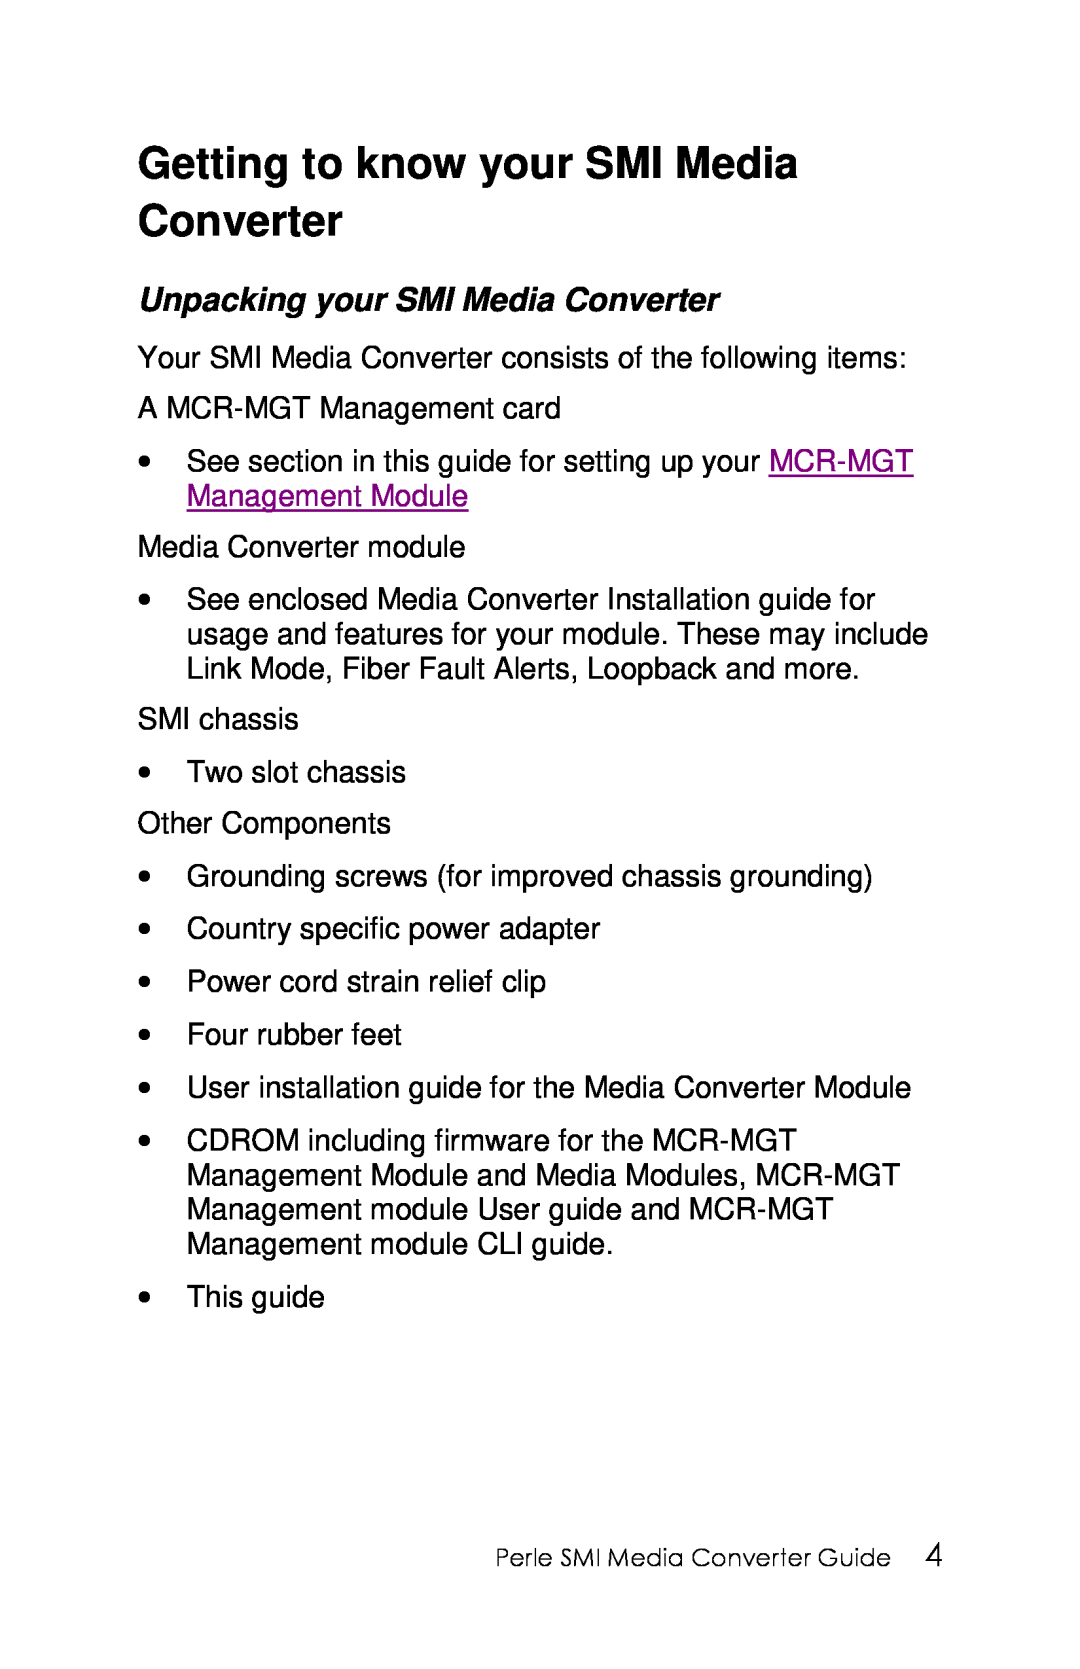 Perle Systems 5500316-13 manual Getting to know your SMI Media Converter, Unpacking your SMI Media Converter 